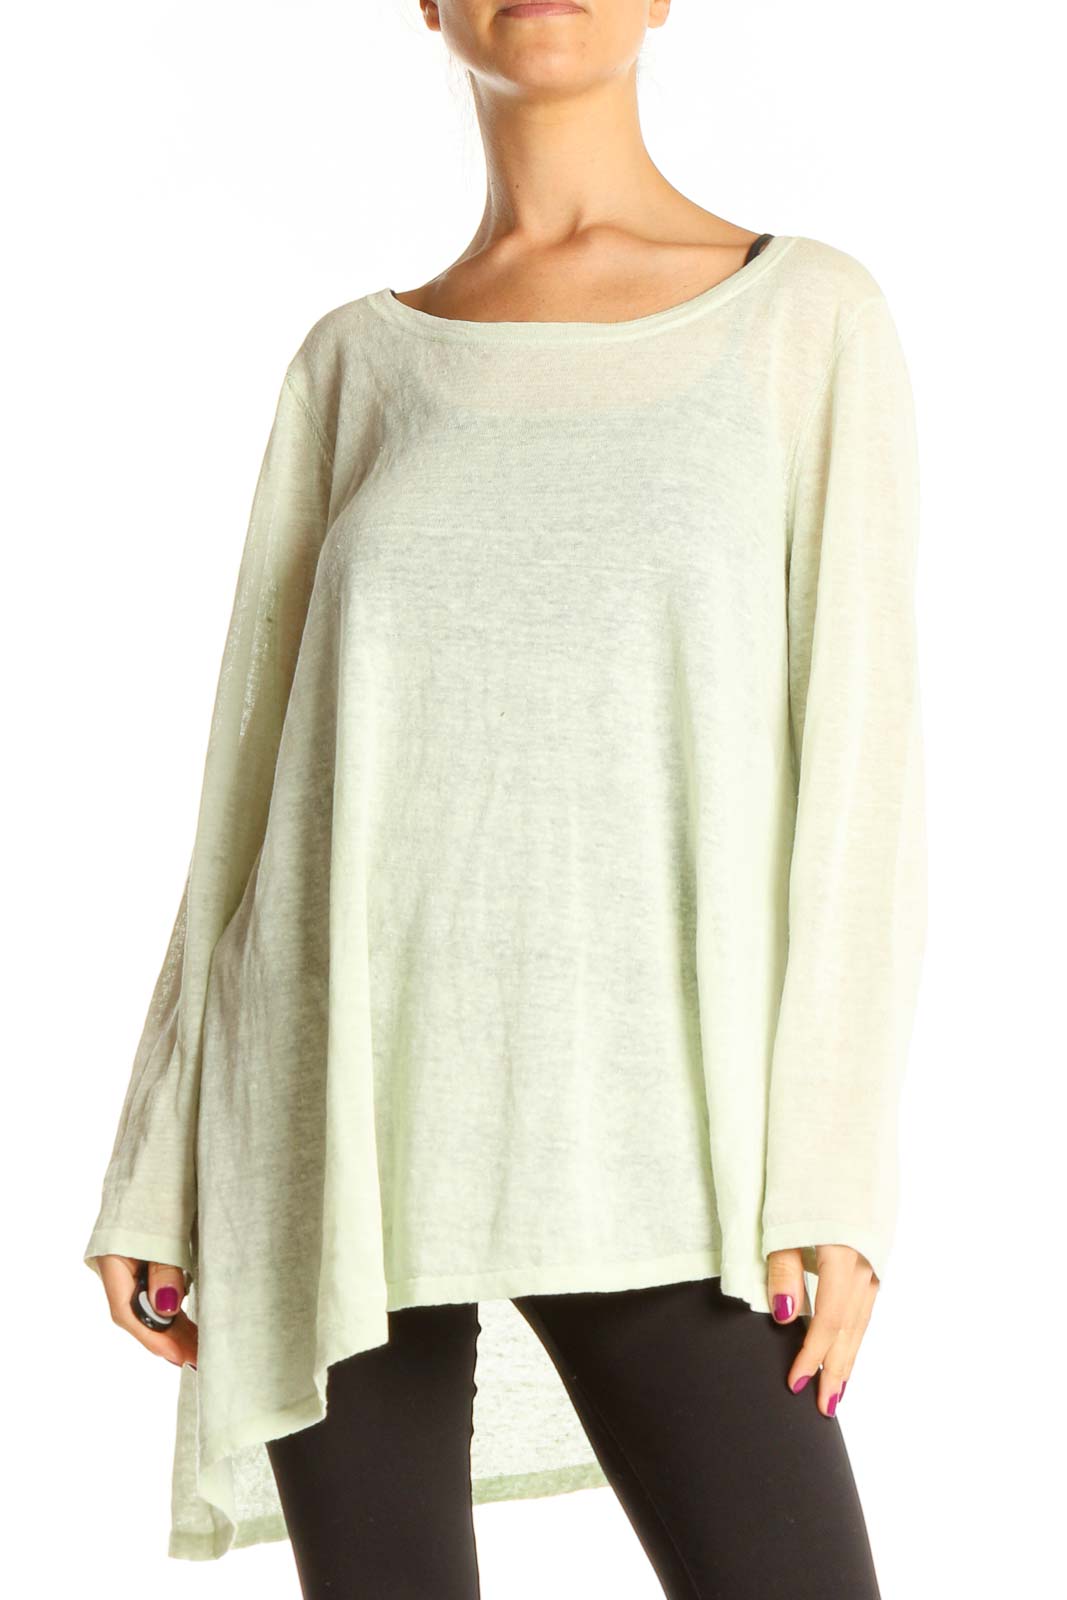 Green Casual Top Front